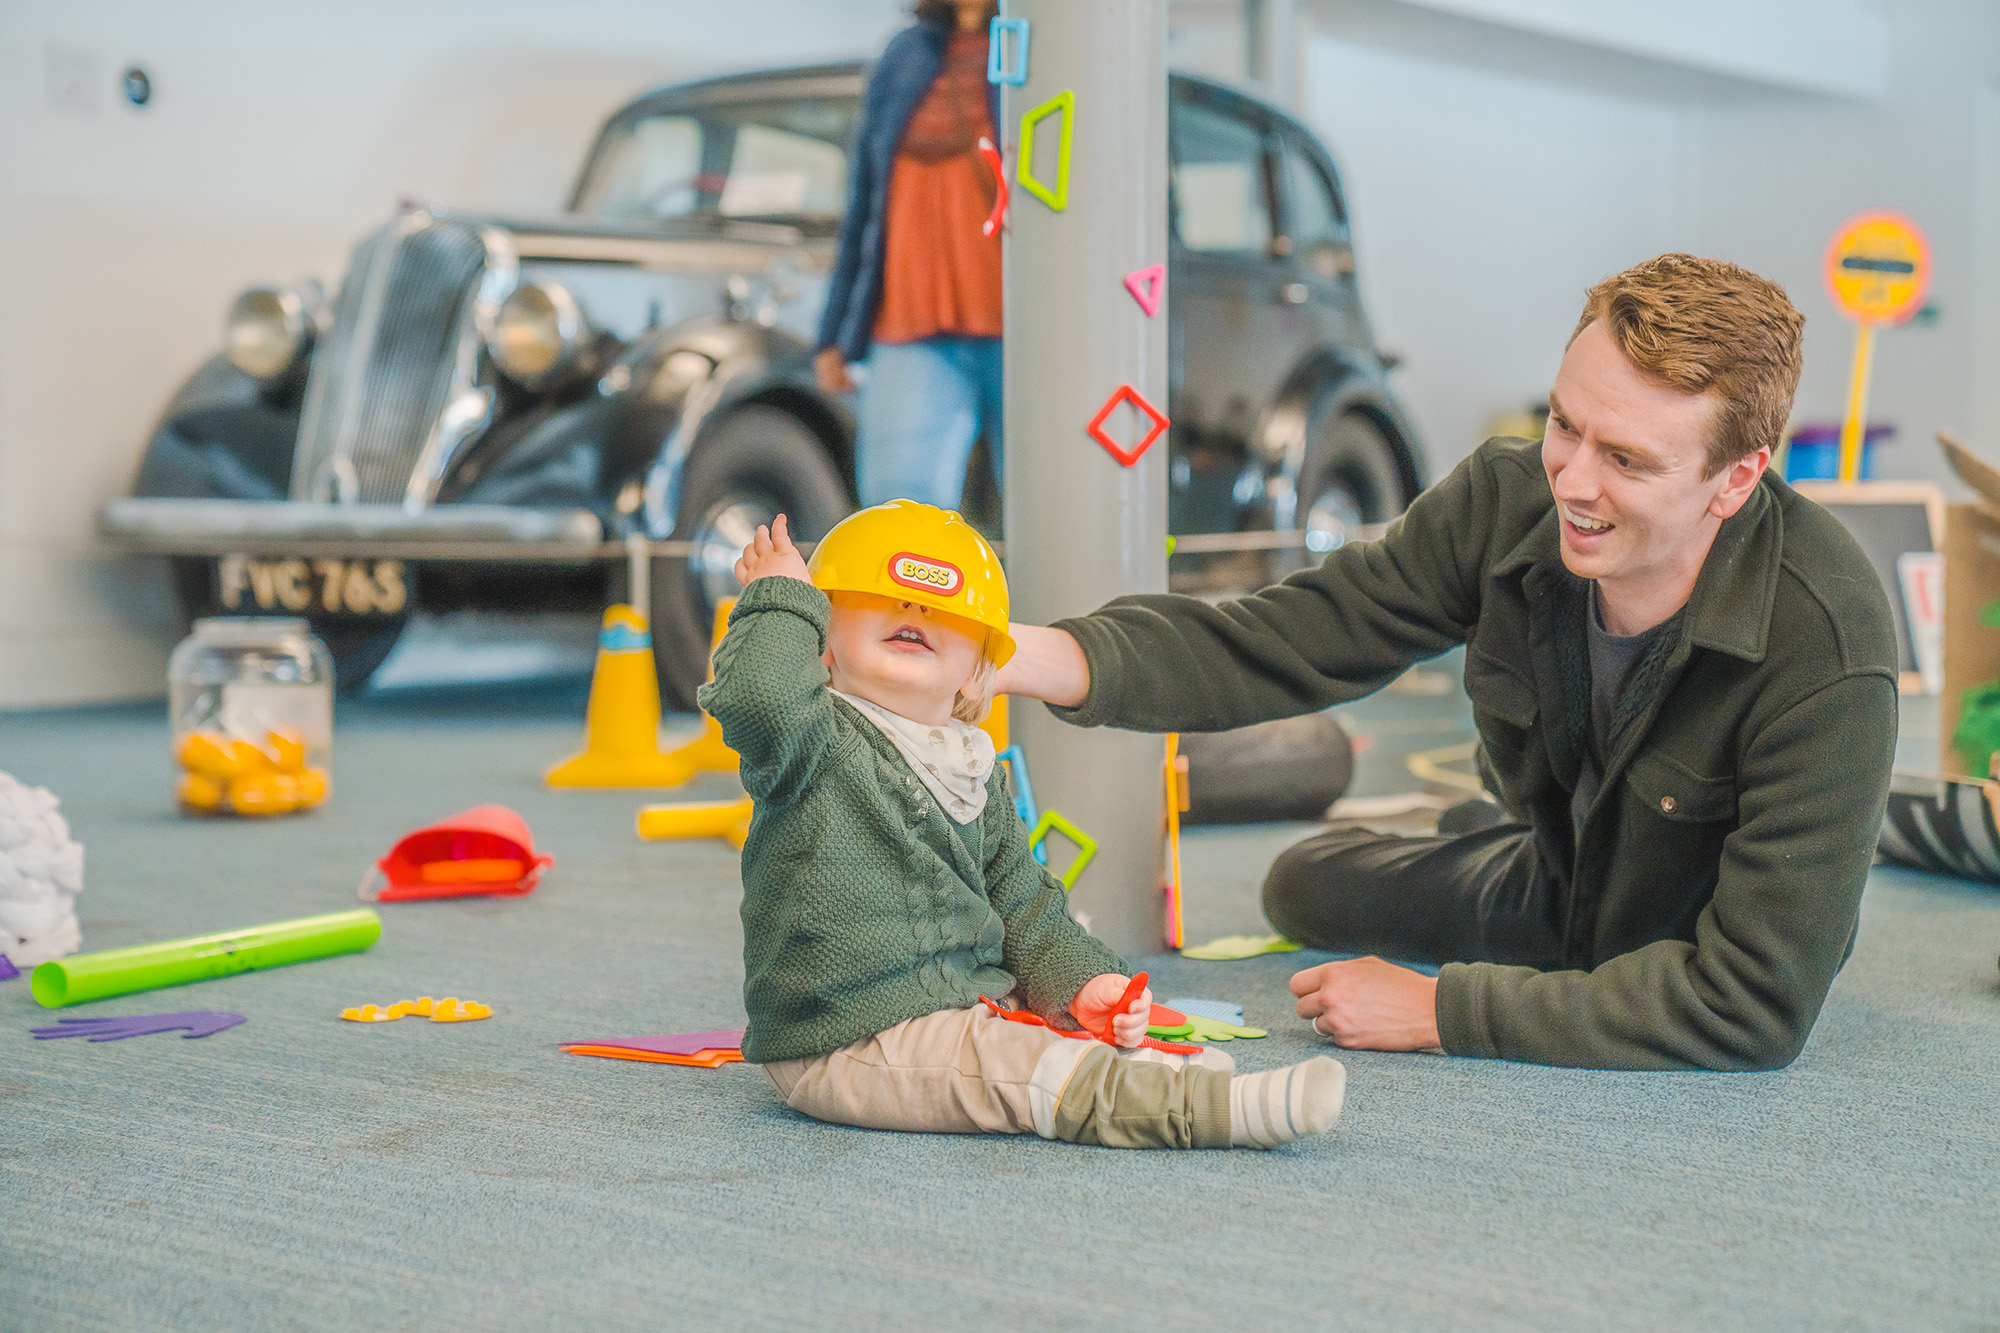 A man and a toddler playing with objects in front of a car on display at Coventry Transport Museum. The toddler has a yellow toy hard hat on his head, covering his eyes. There are toy traffic cones, magnets and a stop sign around them.